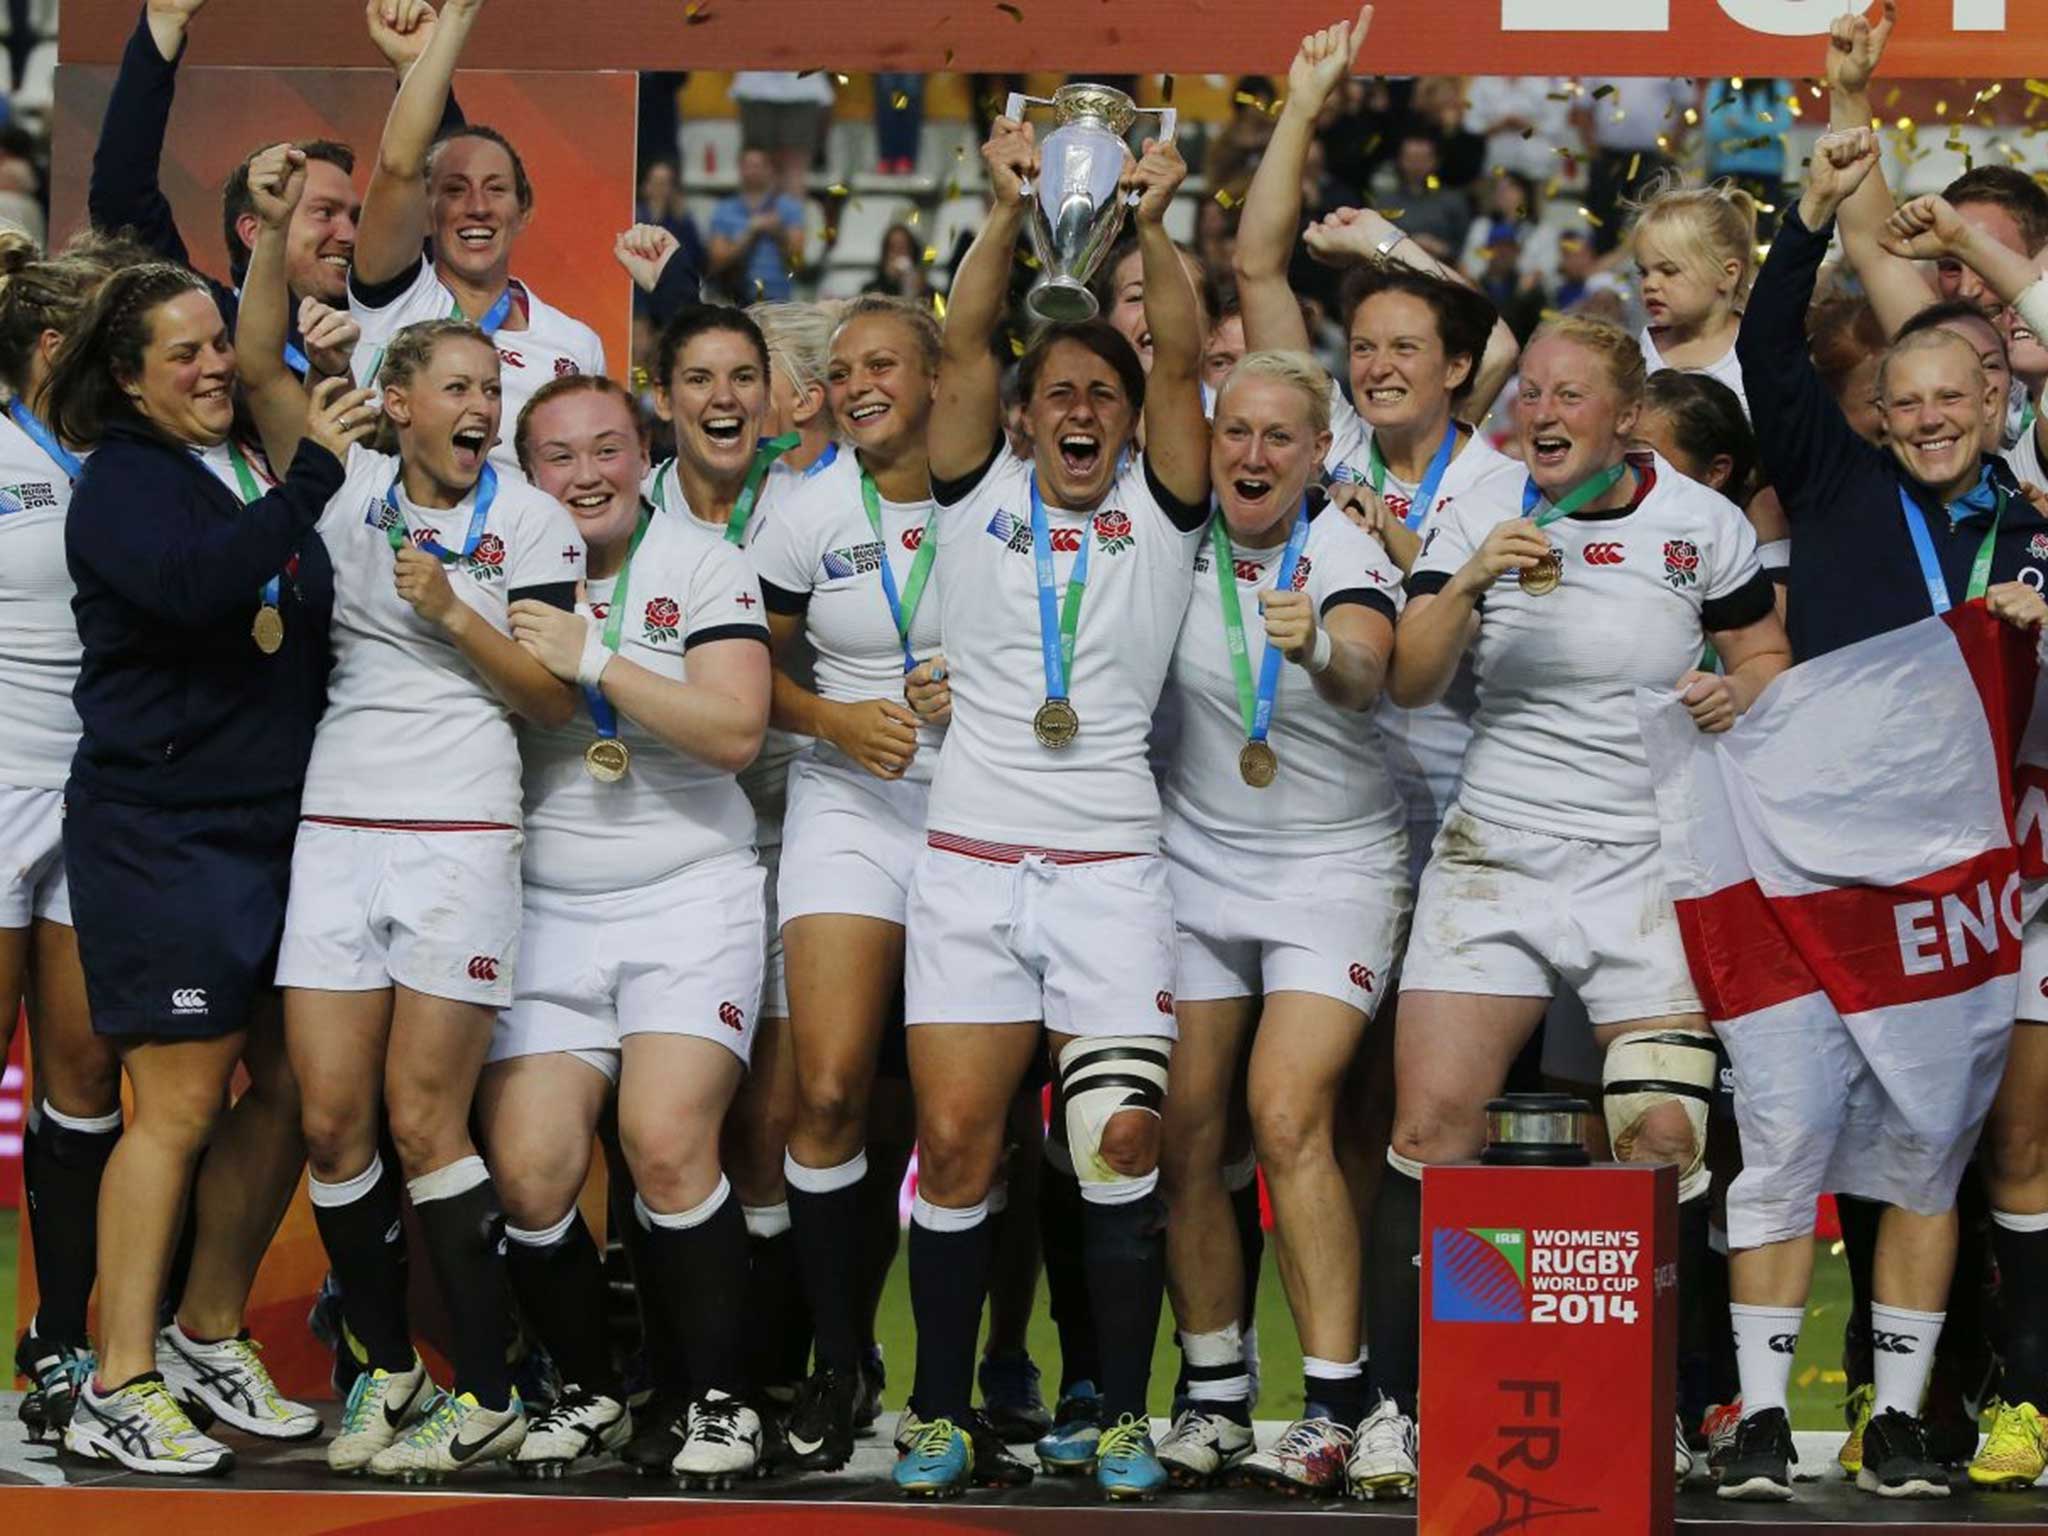 Women S Rugby World Cup Final 2014 England Finally End 20 Years Of Hurt With Triumph Over